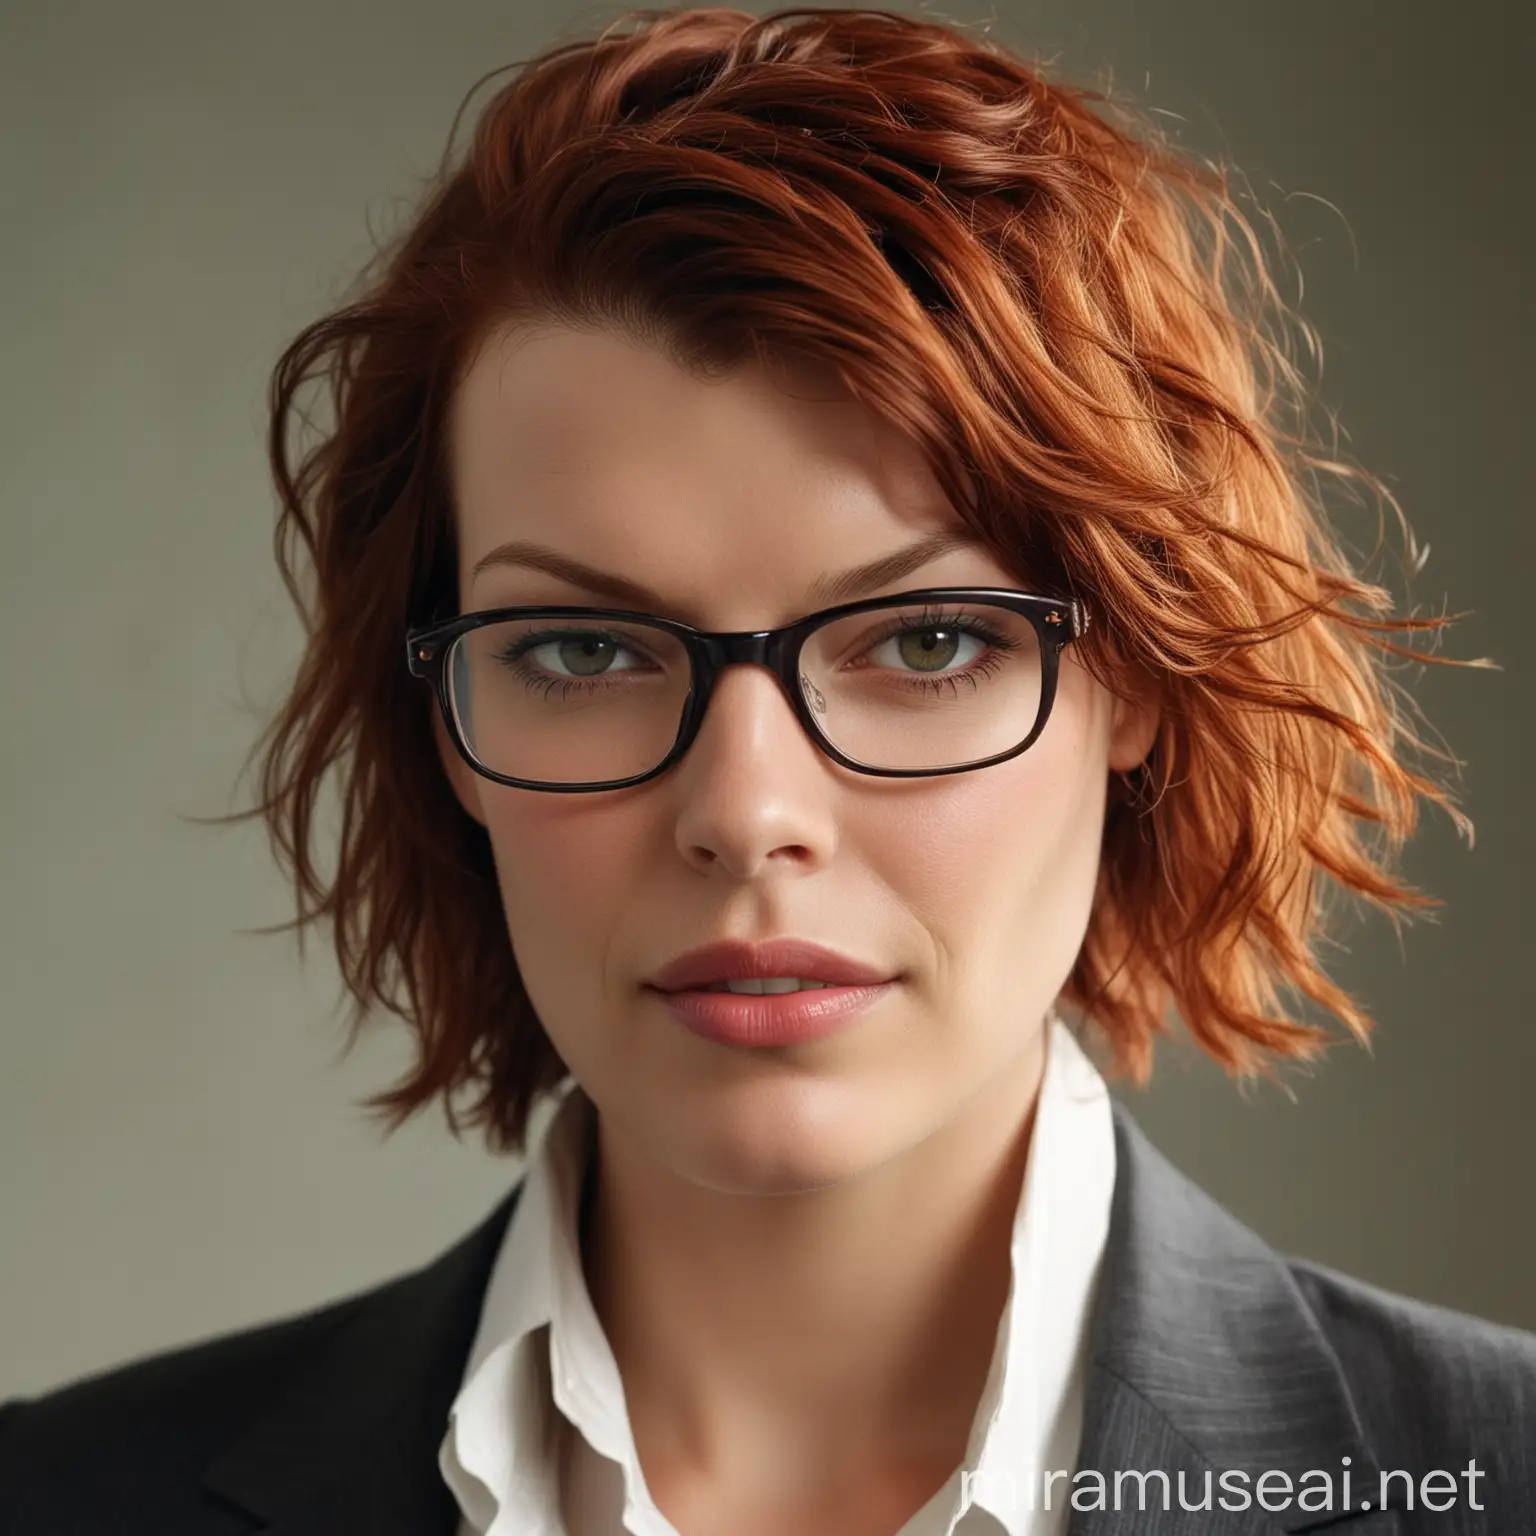 Milla Jovovich and Bald Man Portrait Photography in Realistic Style